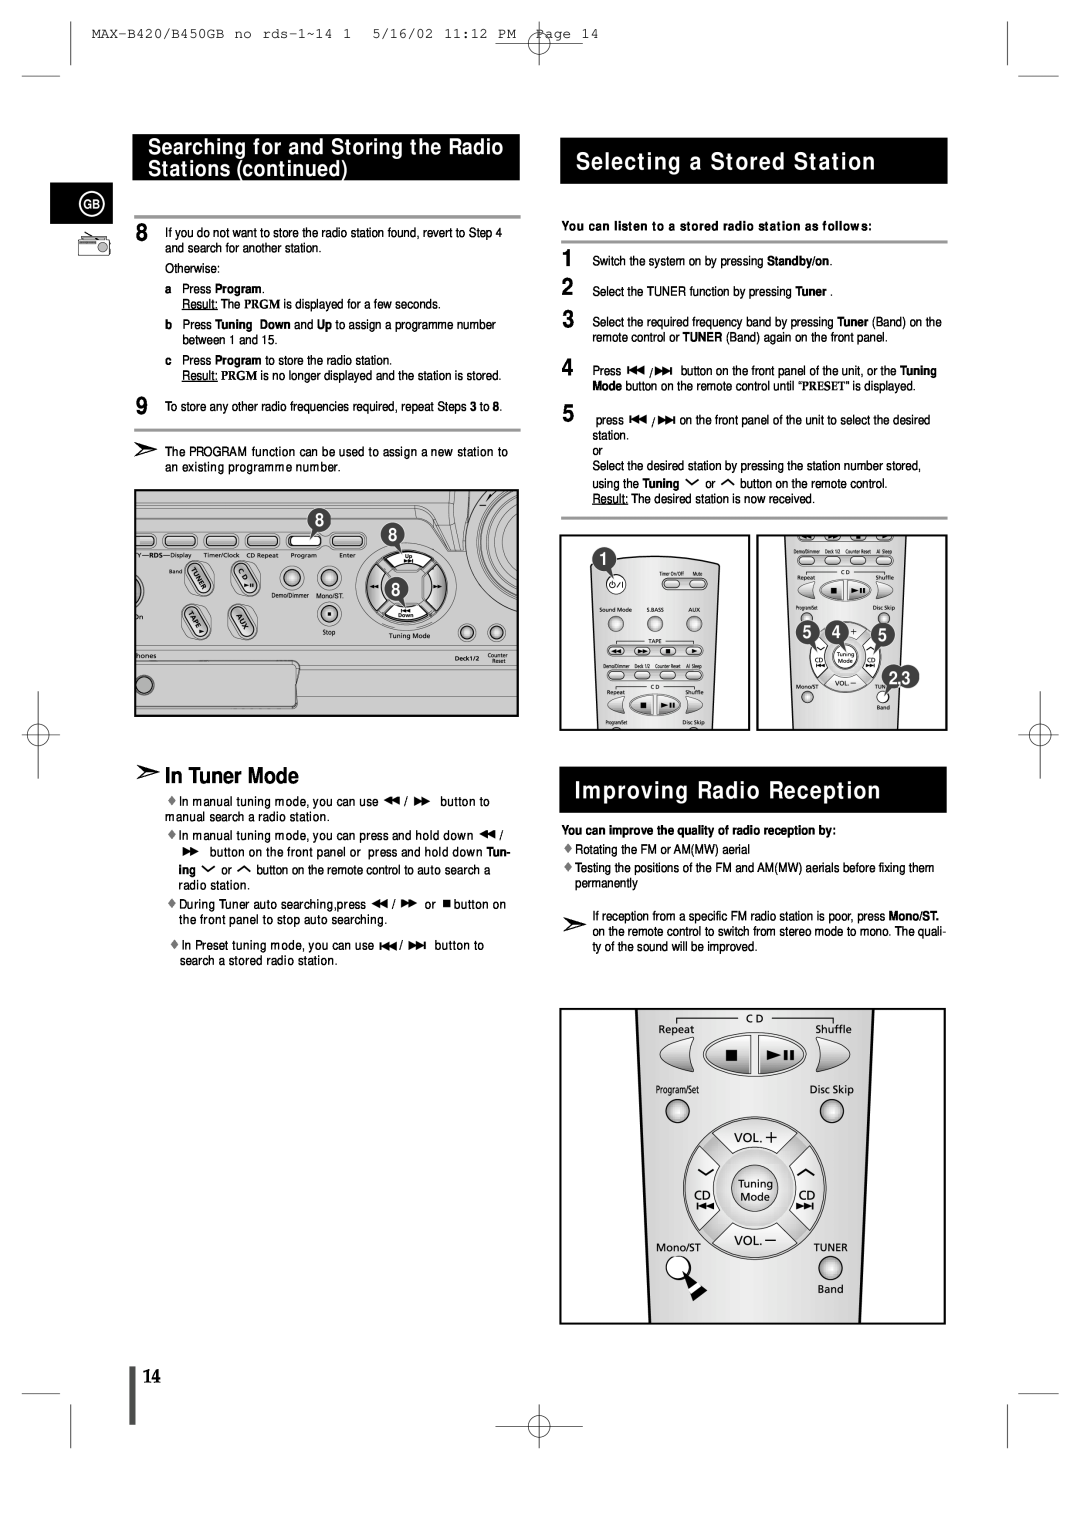 Samsung MAX-B450 instruction manual Selecting a Stored Station, Improving Radio Reception, In Tuner Mode 